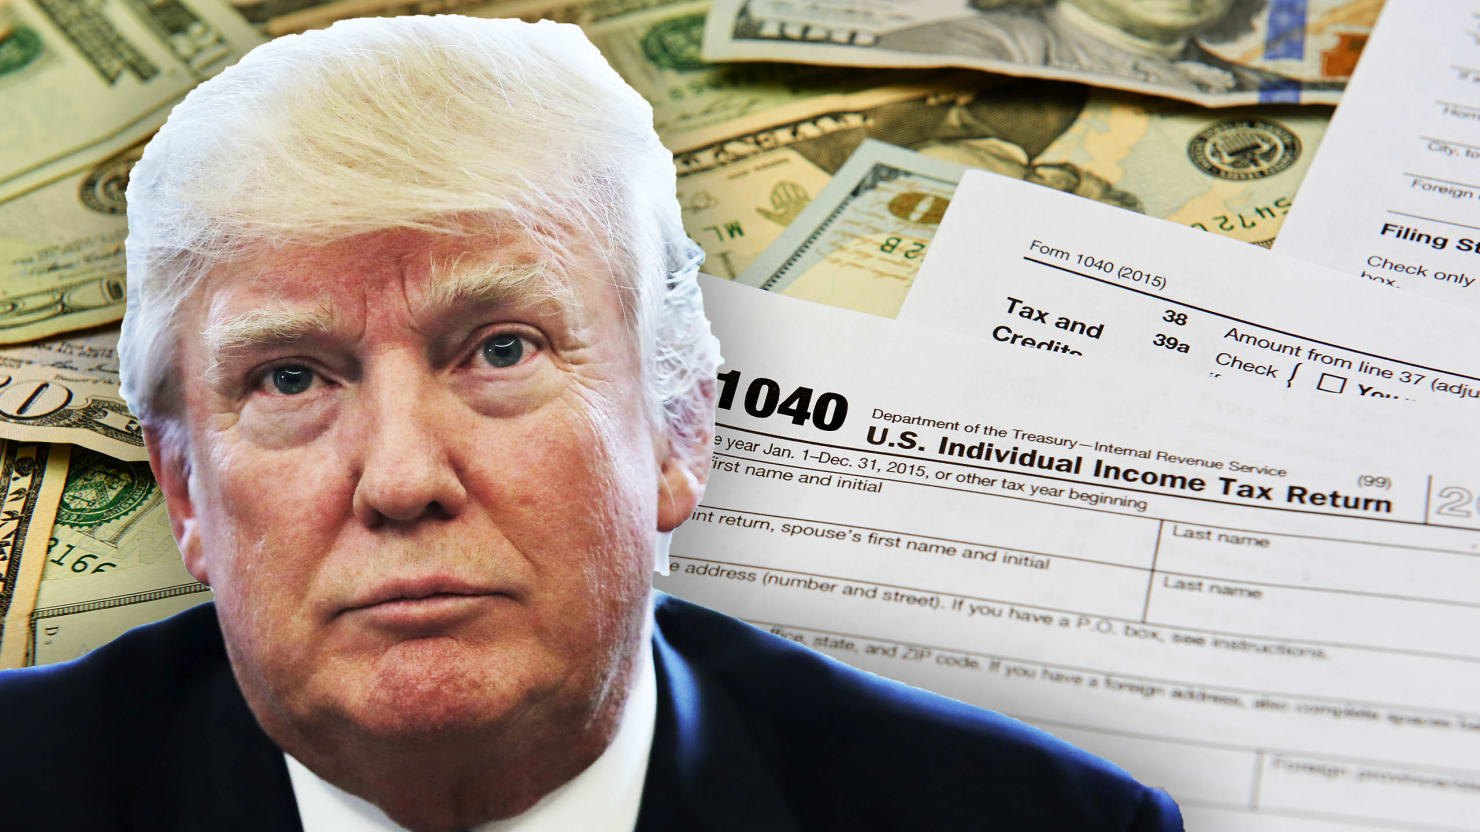 Donald Trump's Tax Plan—The Rich Pay Less, and You Make Up the Difference